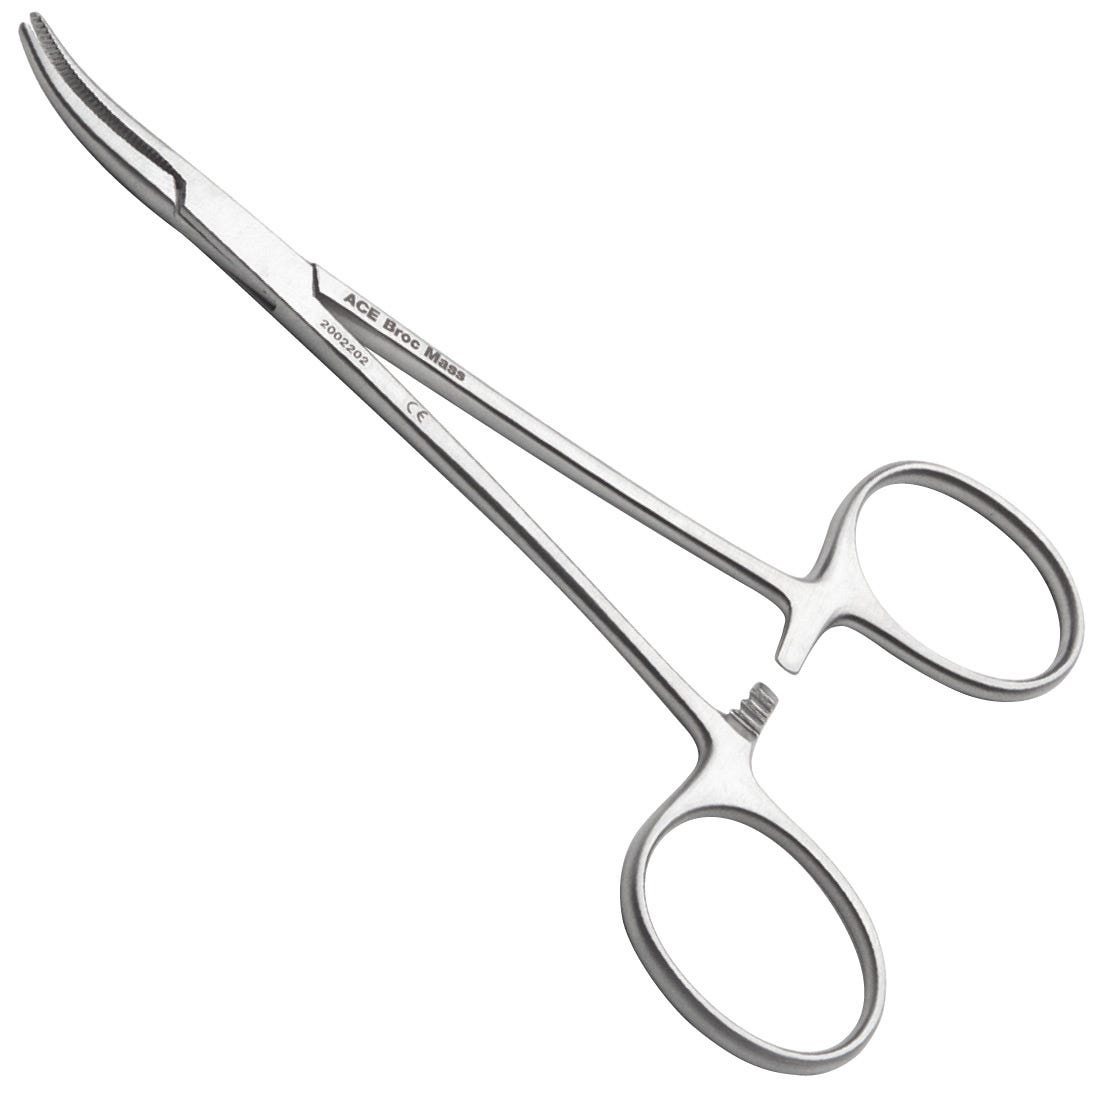 ACE Halsted Mosquito Forceps #3, curved, 4-3/4", 12cm